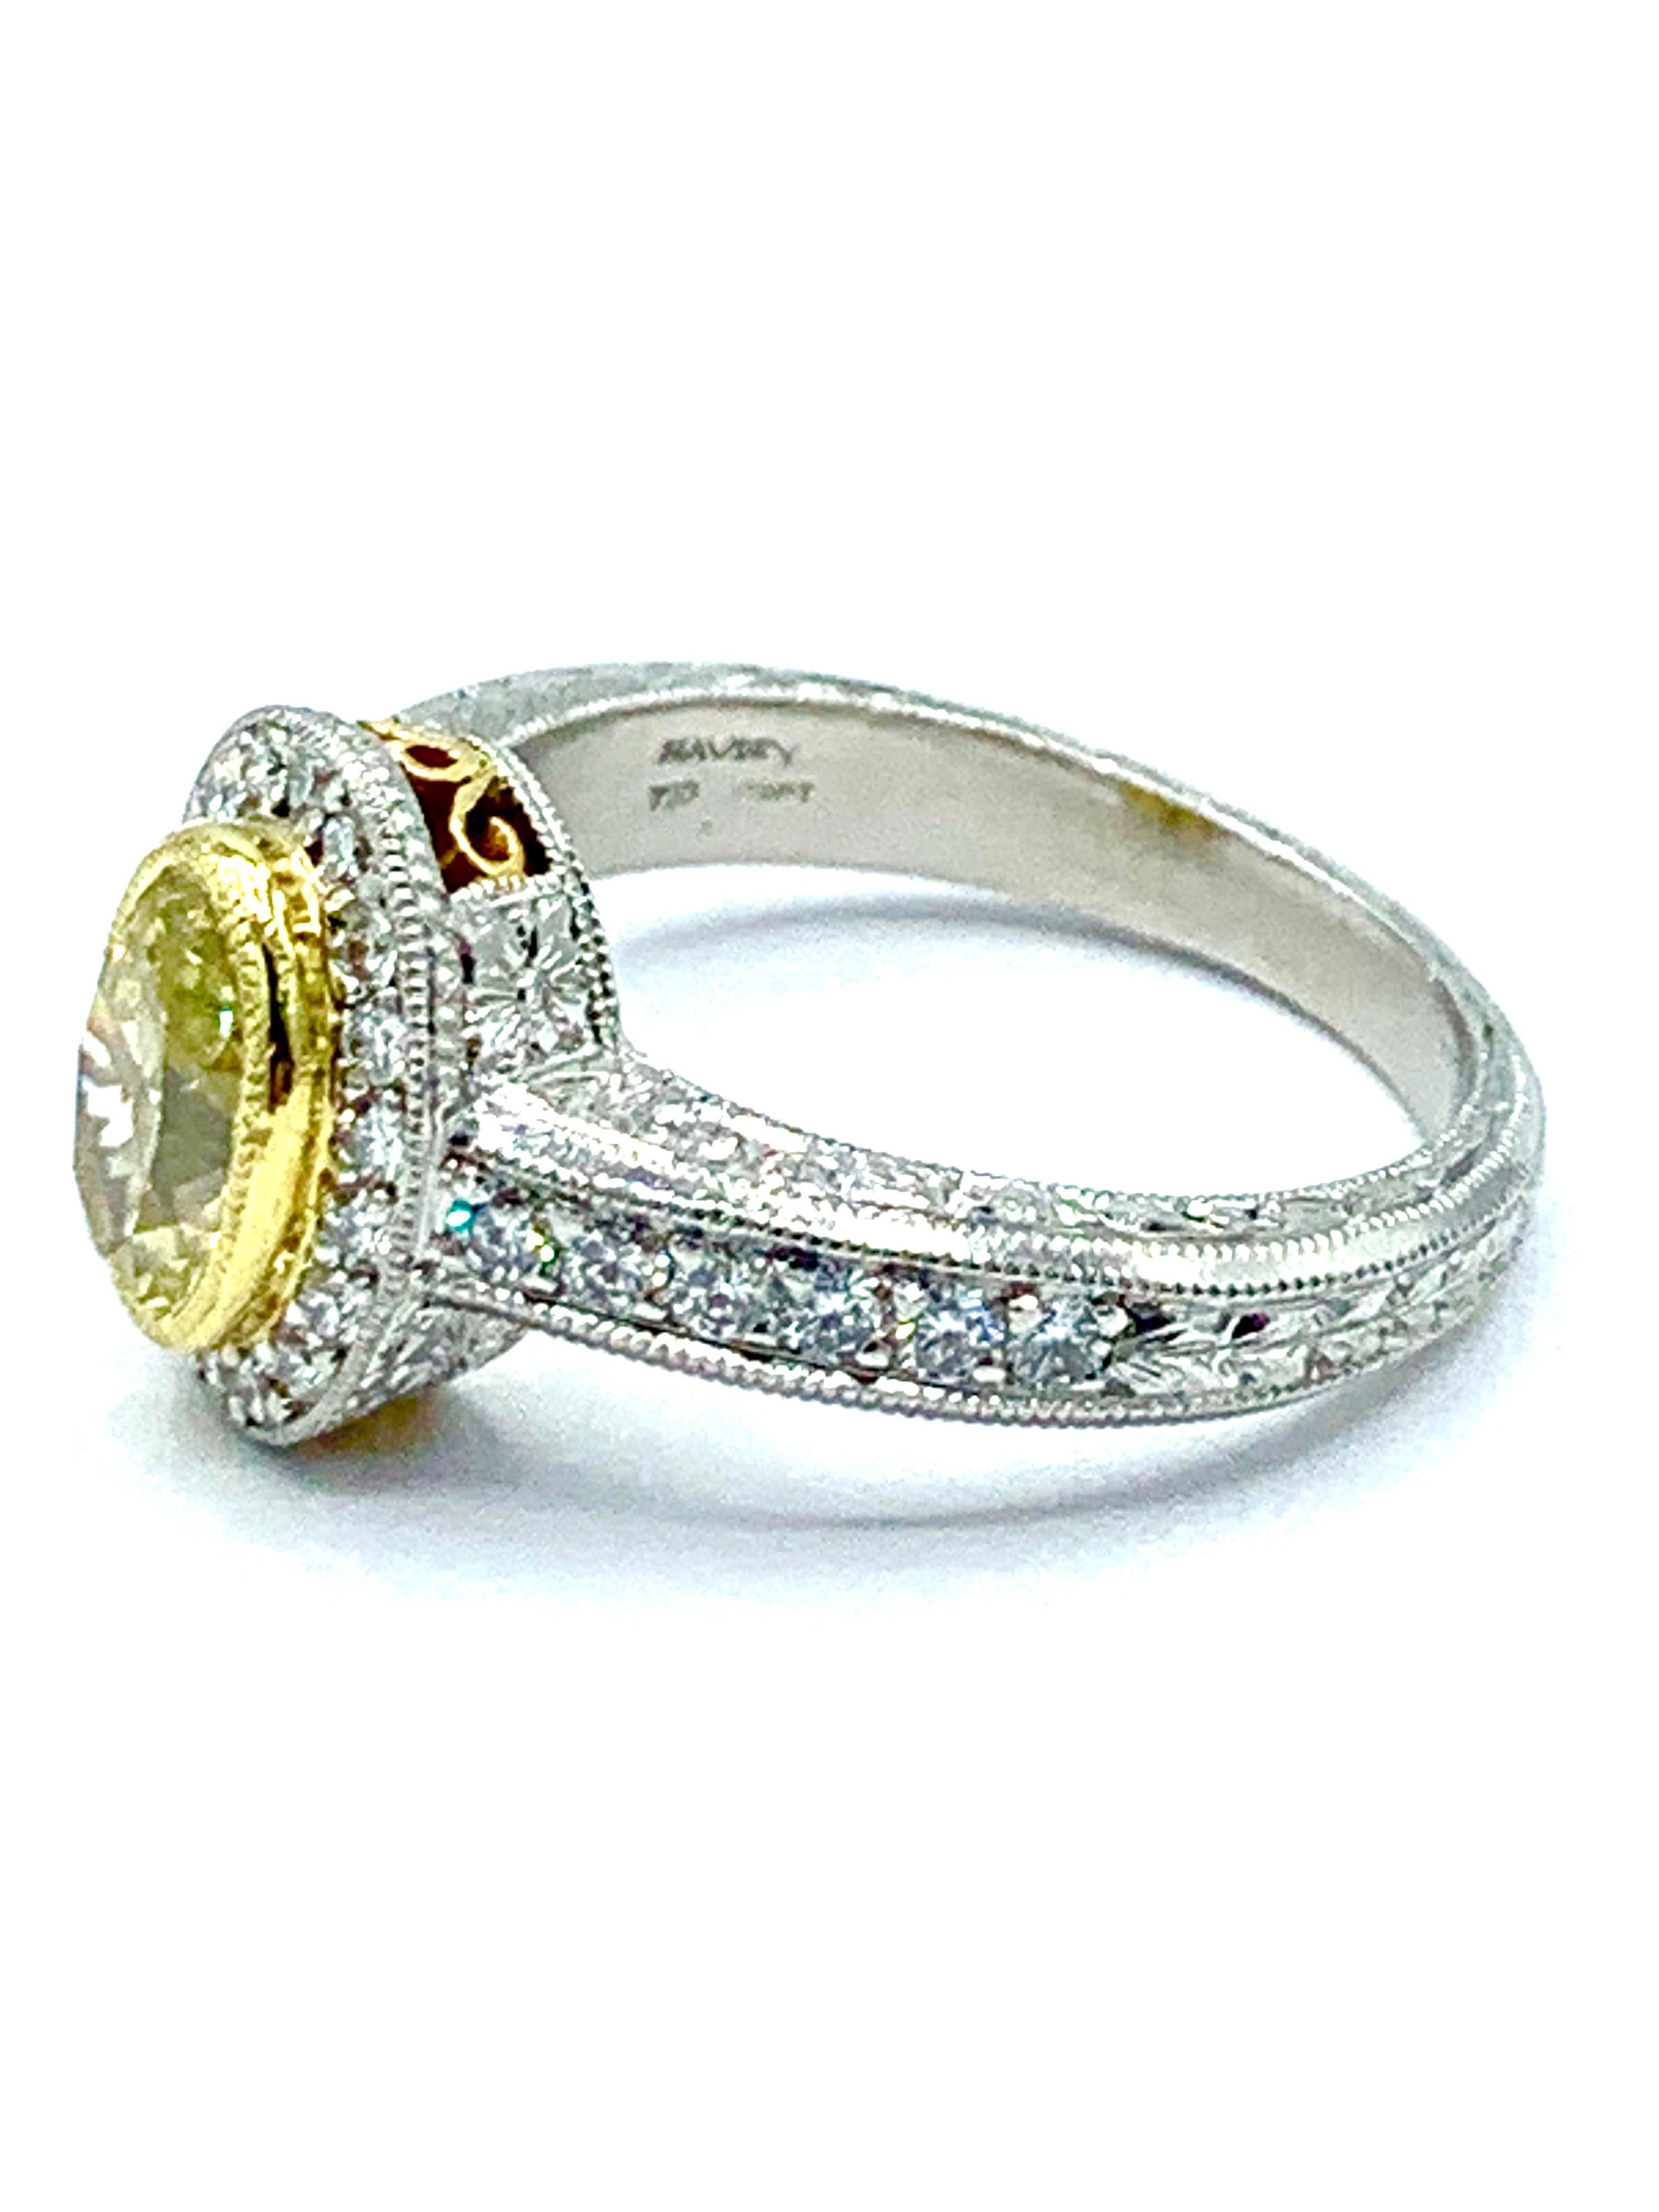 Women's or Men's 1.00 Carat Fancy Yellow Oval Diamond Platinum and Yellow Gold Engagement Ring